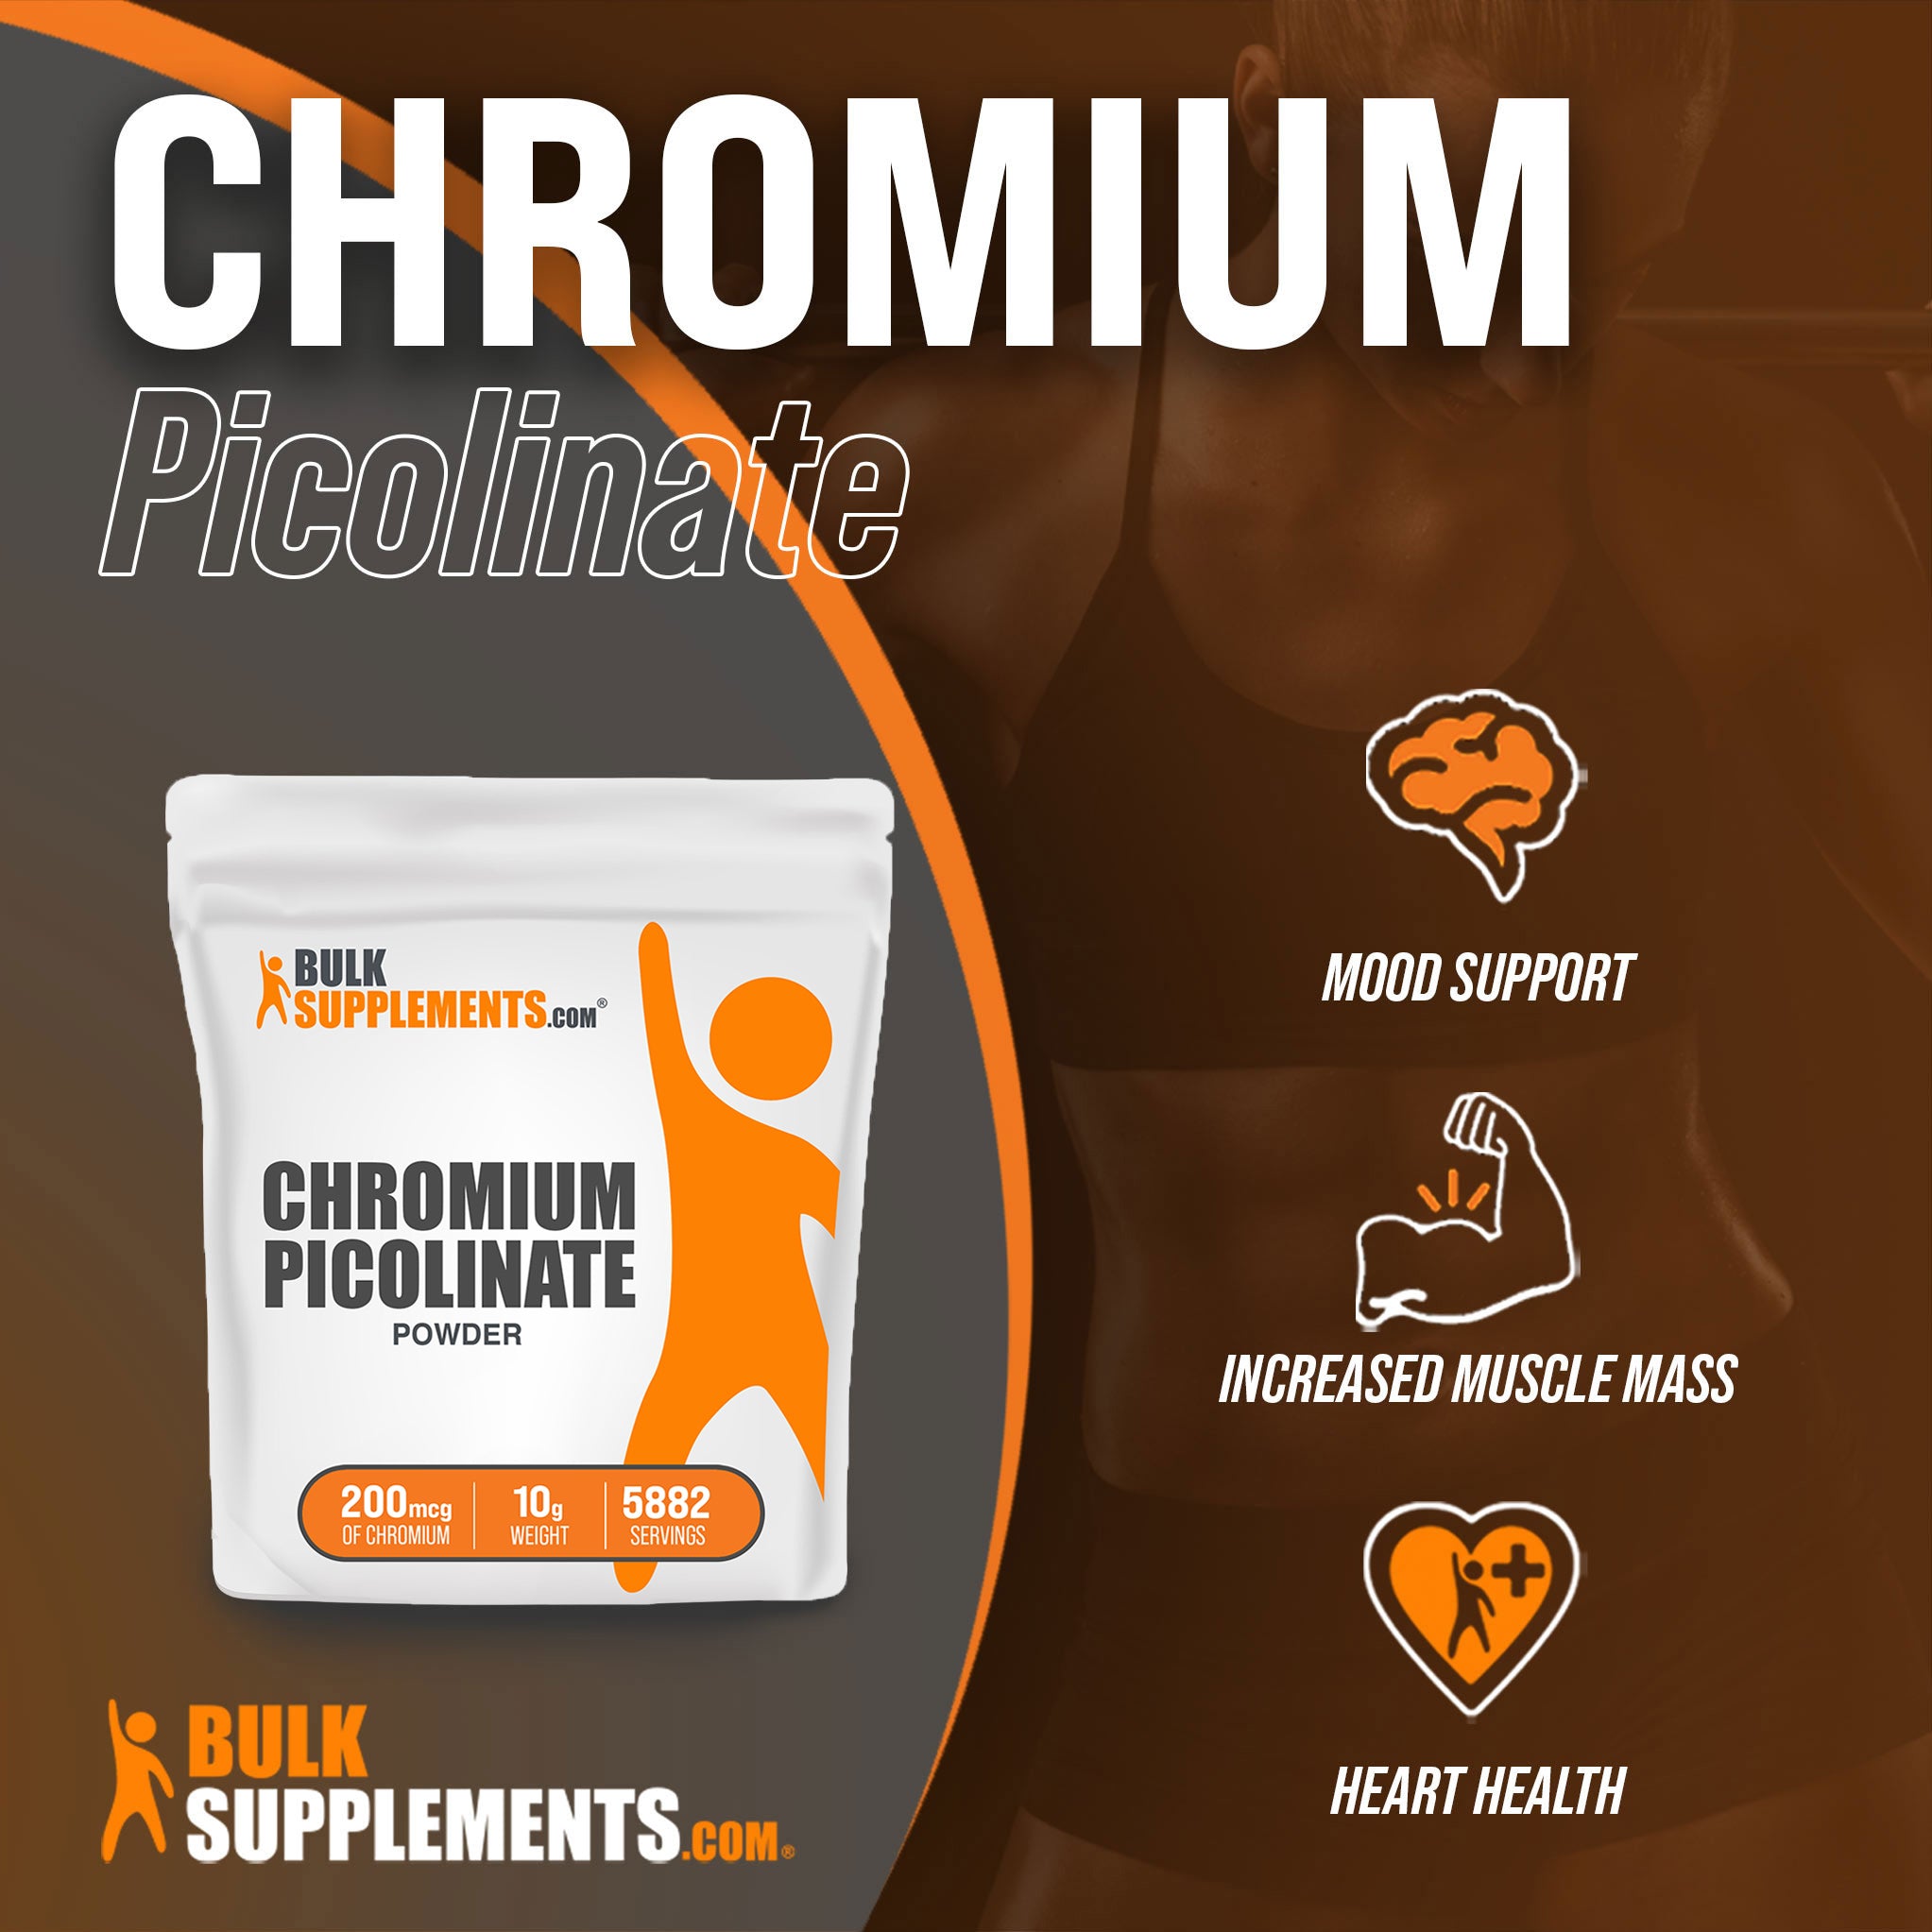 10g of chromium picolinate 1000mcg for weight loss, mood support and more